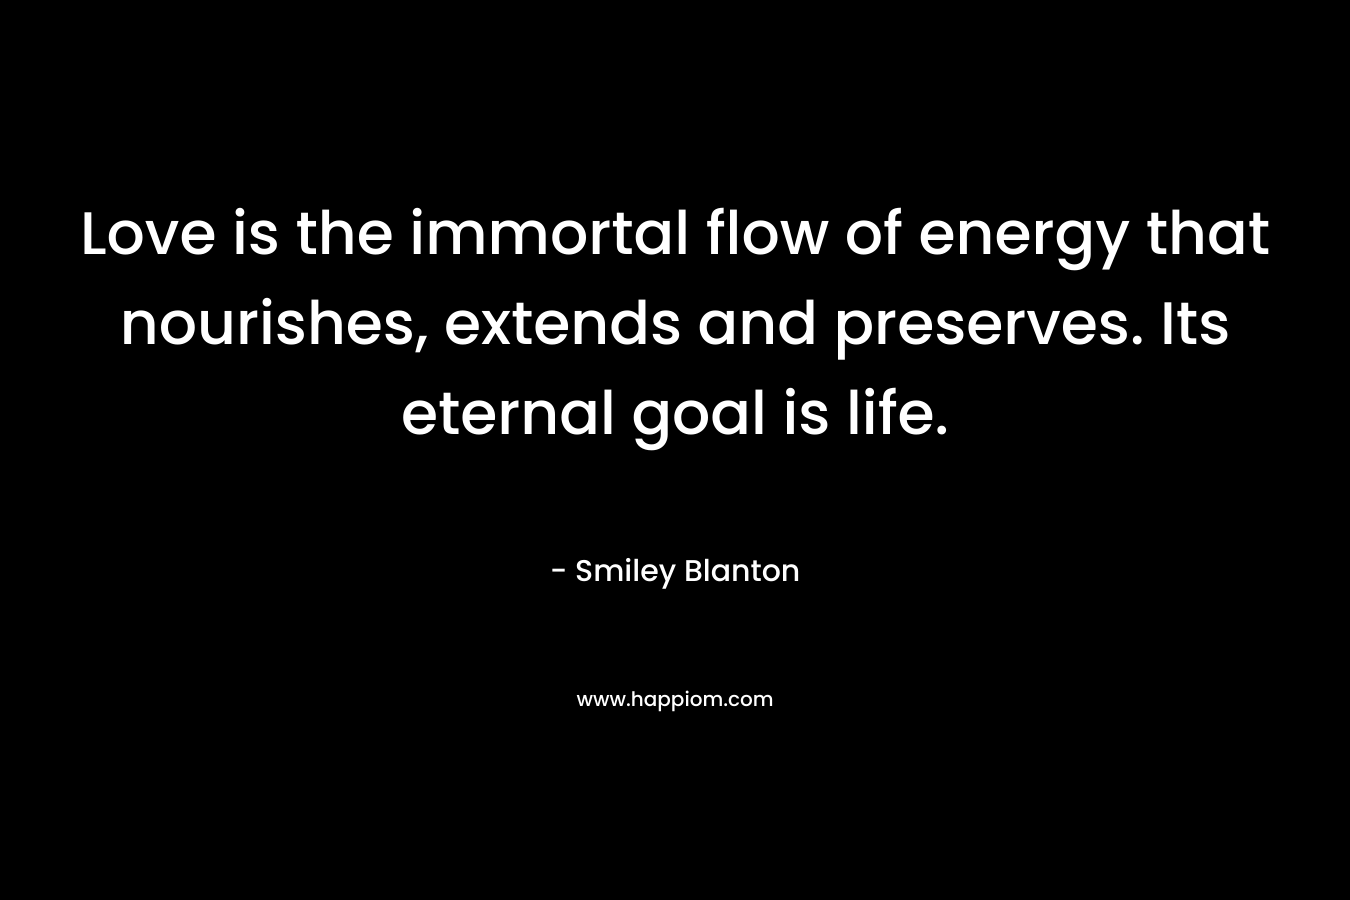 Love is the immortal flow of energy that nourishes, extends and preserves. Its eternal goal is life.